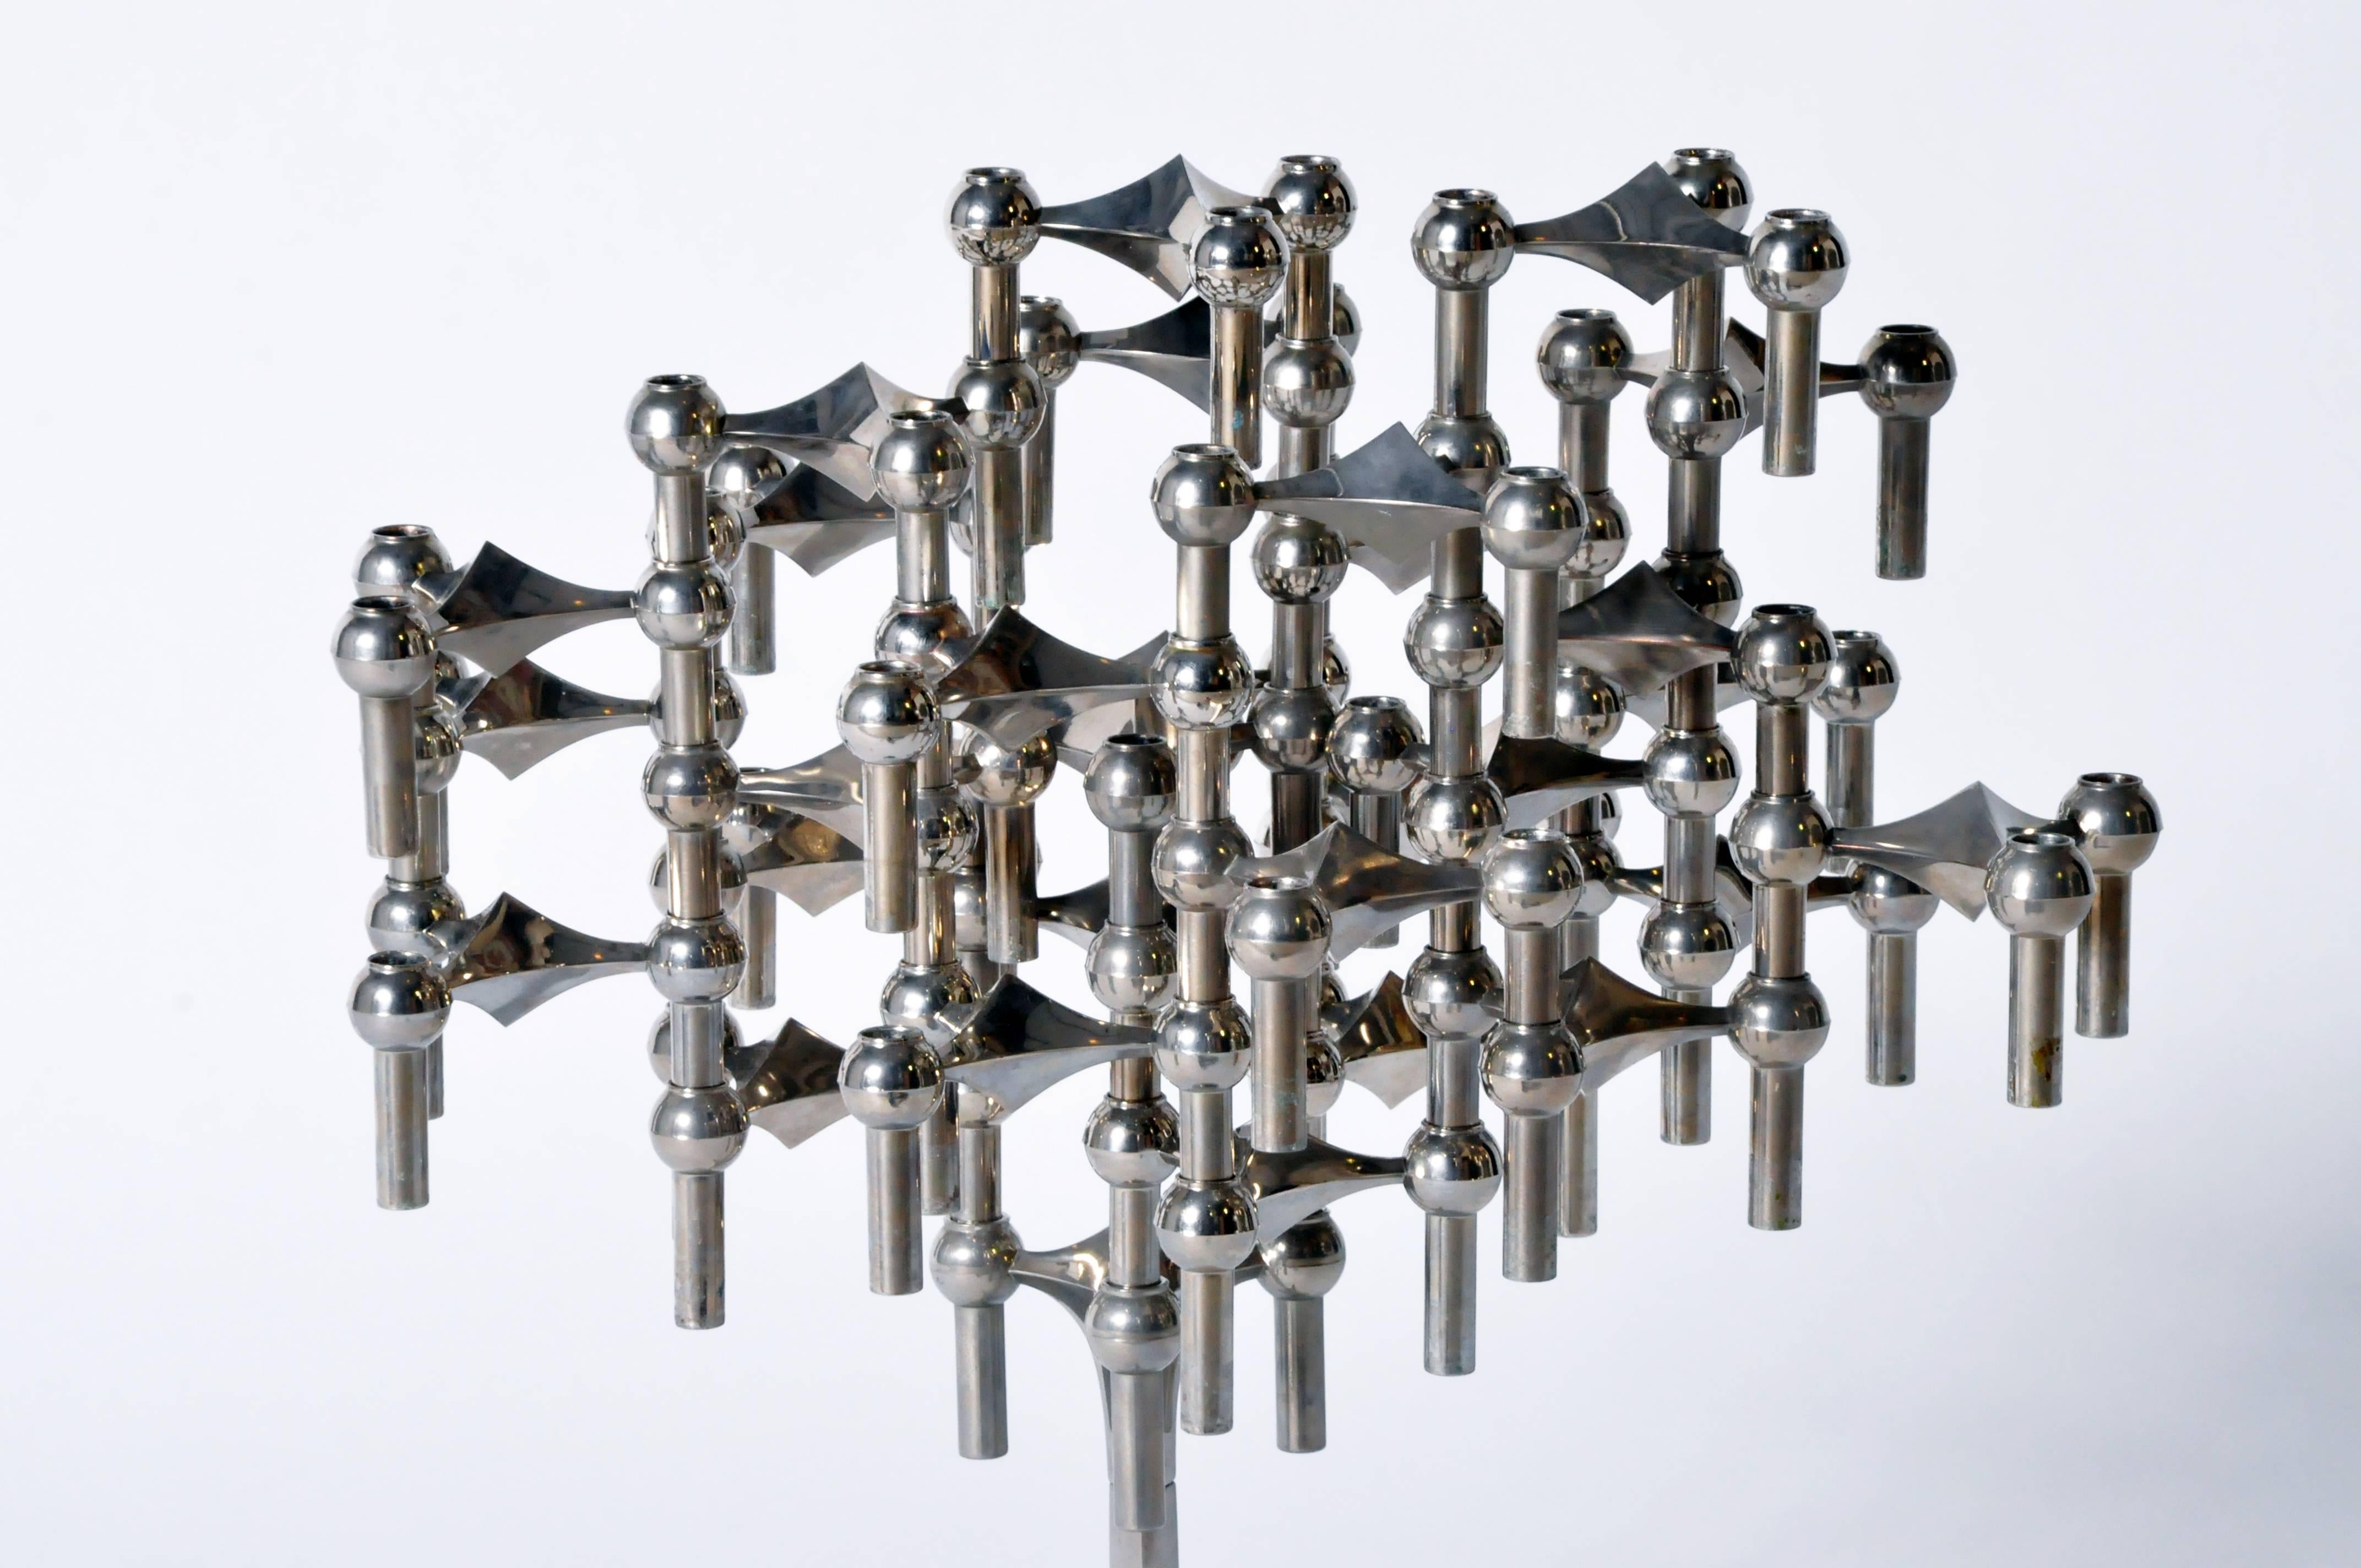 This modular candelabrum was created by Fritz Nagel and Caesar Stoffi, and manufactured by BMF (Bayerische Metalwarenfabrik). Comprised of 30 individual, stackable chrome elements this versatile and unique creation makes quite the statement. A tall